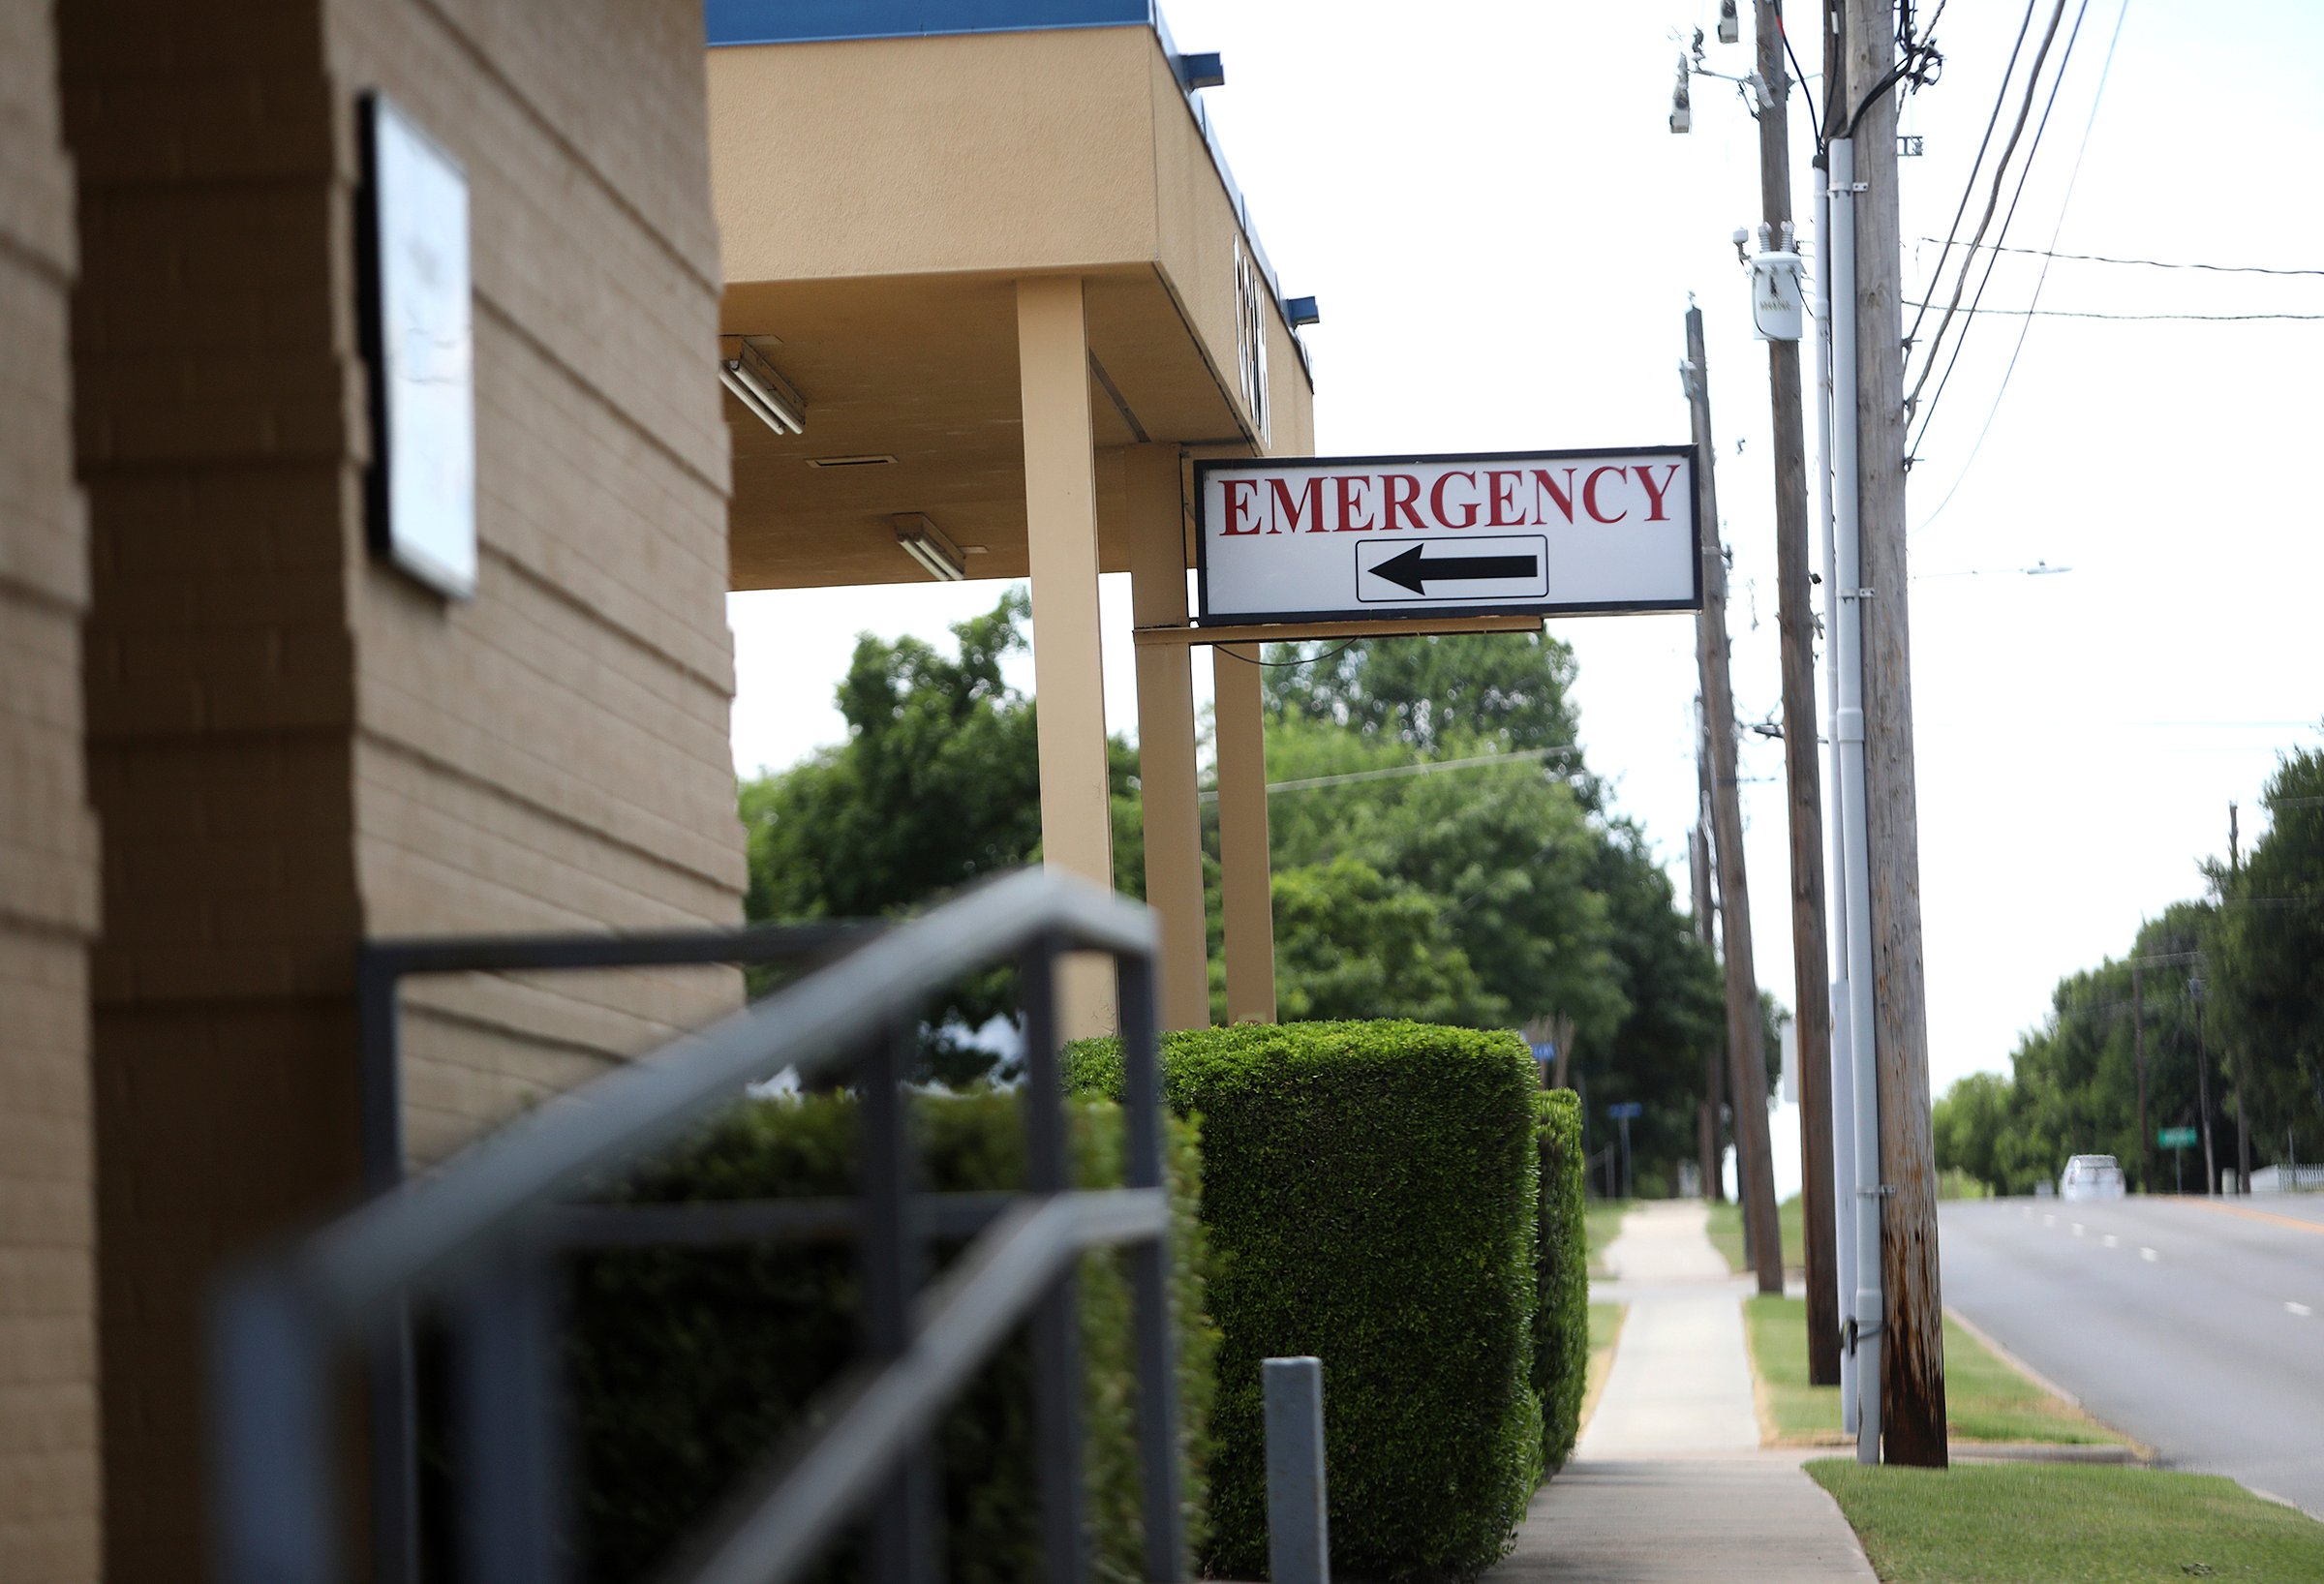 A sign points to the emergency room of Clay County Memorial Hospital on Friday, May 8, 2020. Residents of rural Clay County can get coronavirus tests at the local hospital with appointments from their health care provider. (Amanda McCoy/Fort Worth Star-Telegram via AP)